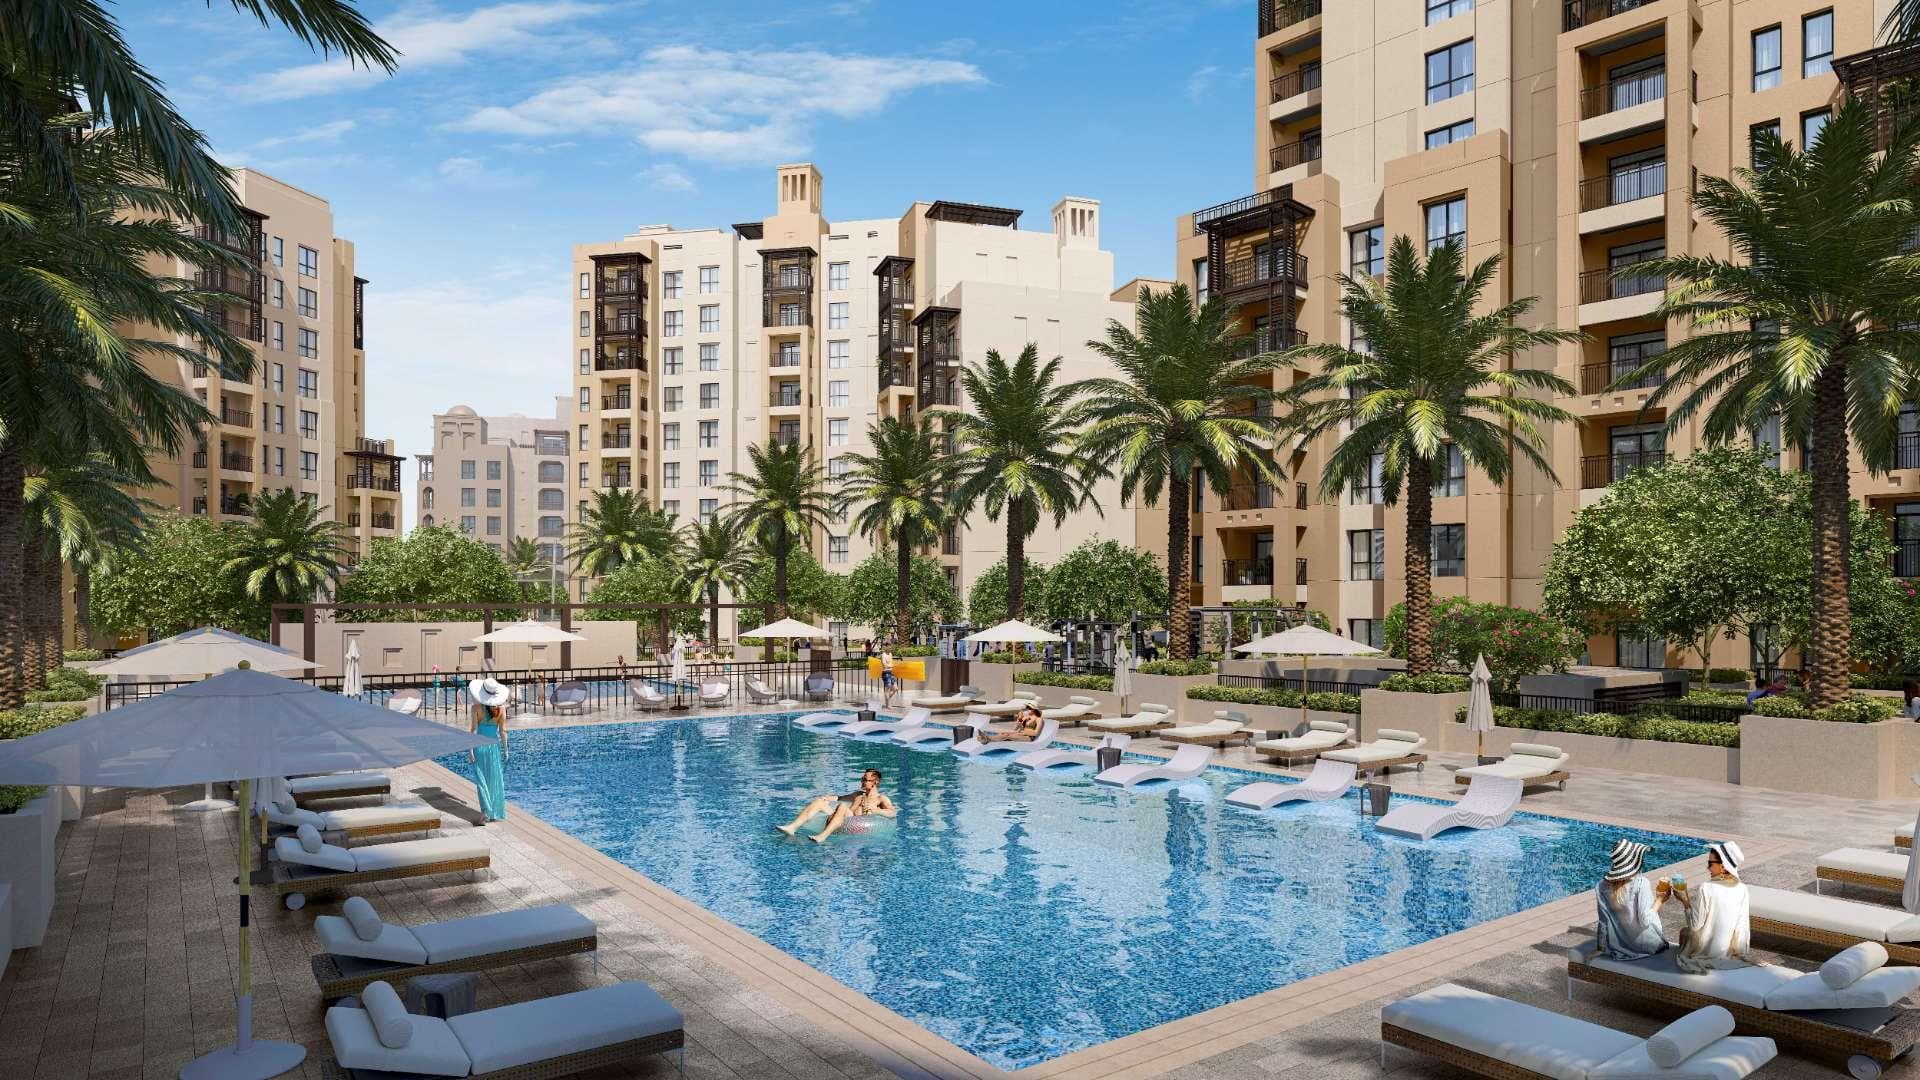 1 Bedroom Apartment For Sale Madinat Jumeirah Living Lp14977 1a7f11e6ae08af00.jpg